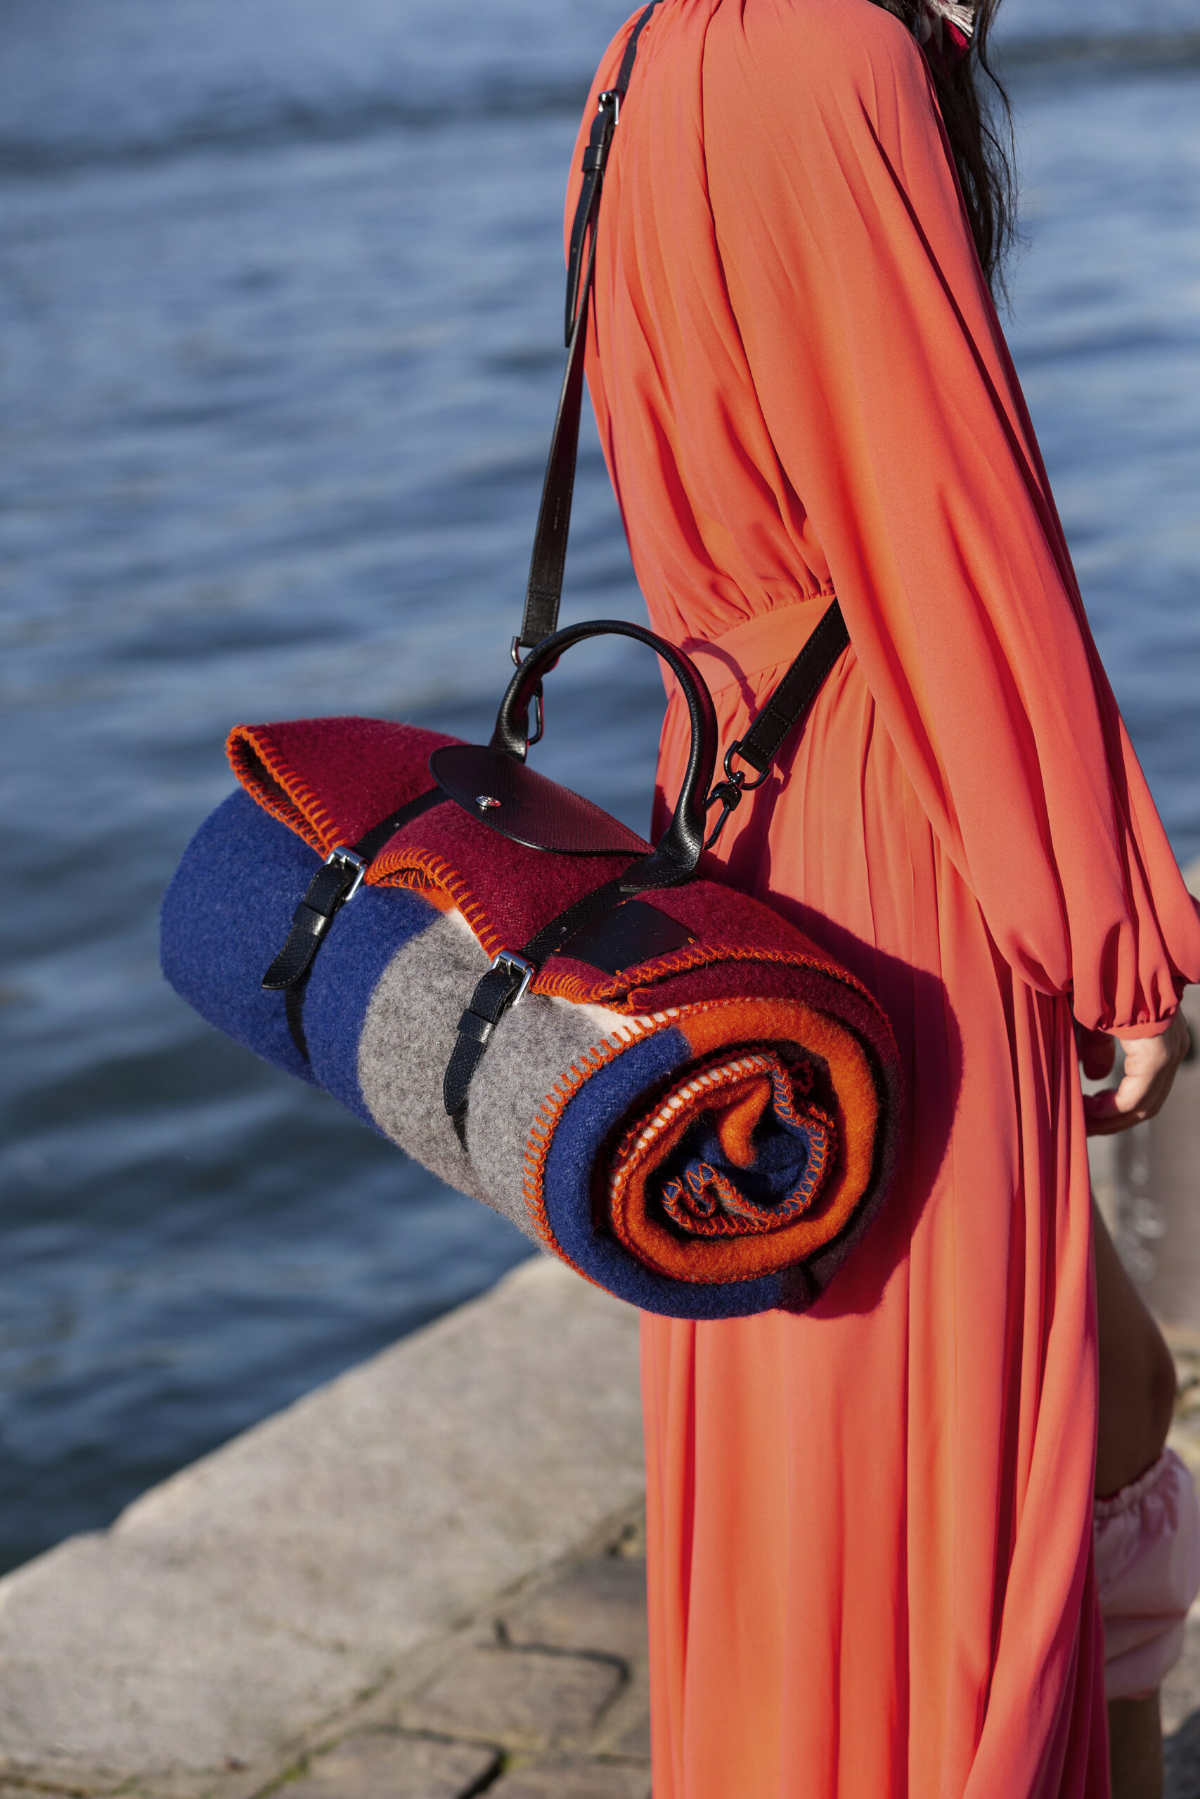 Longchamp X Kristine Five Melvaer: A Feelgood Collaboration Coming In From The Cold